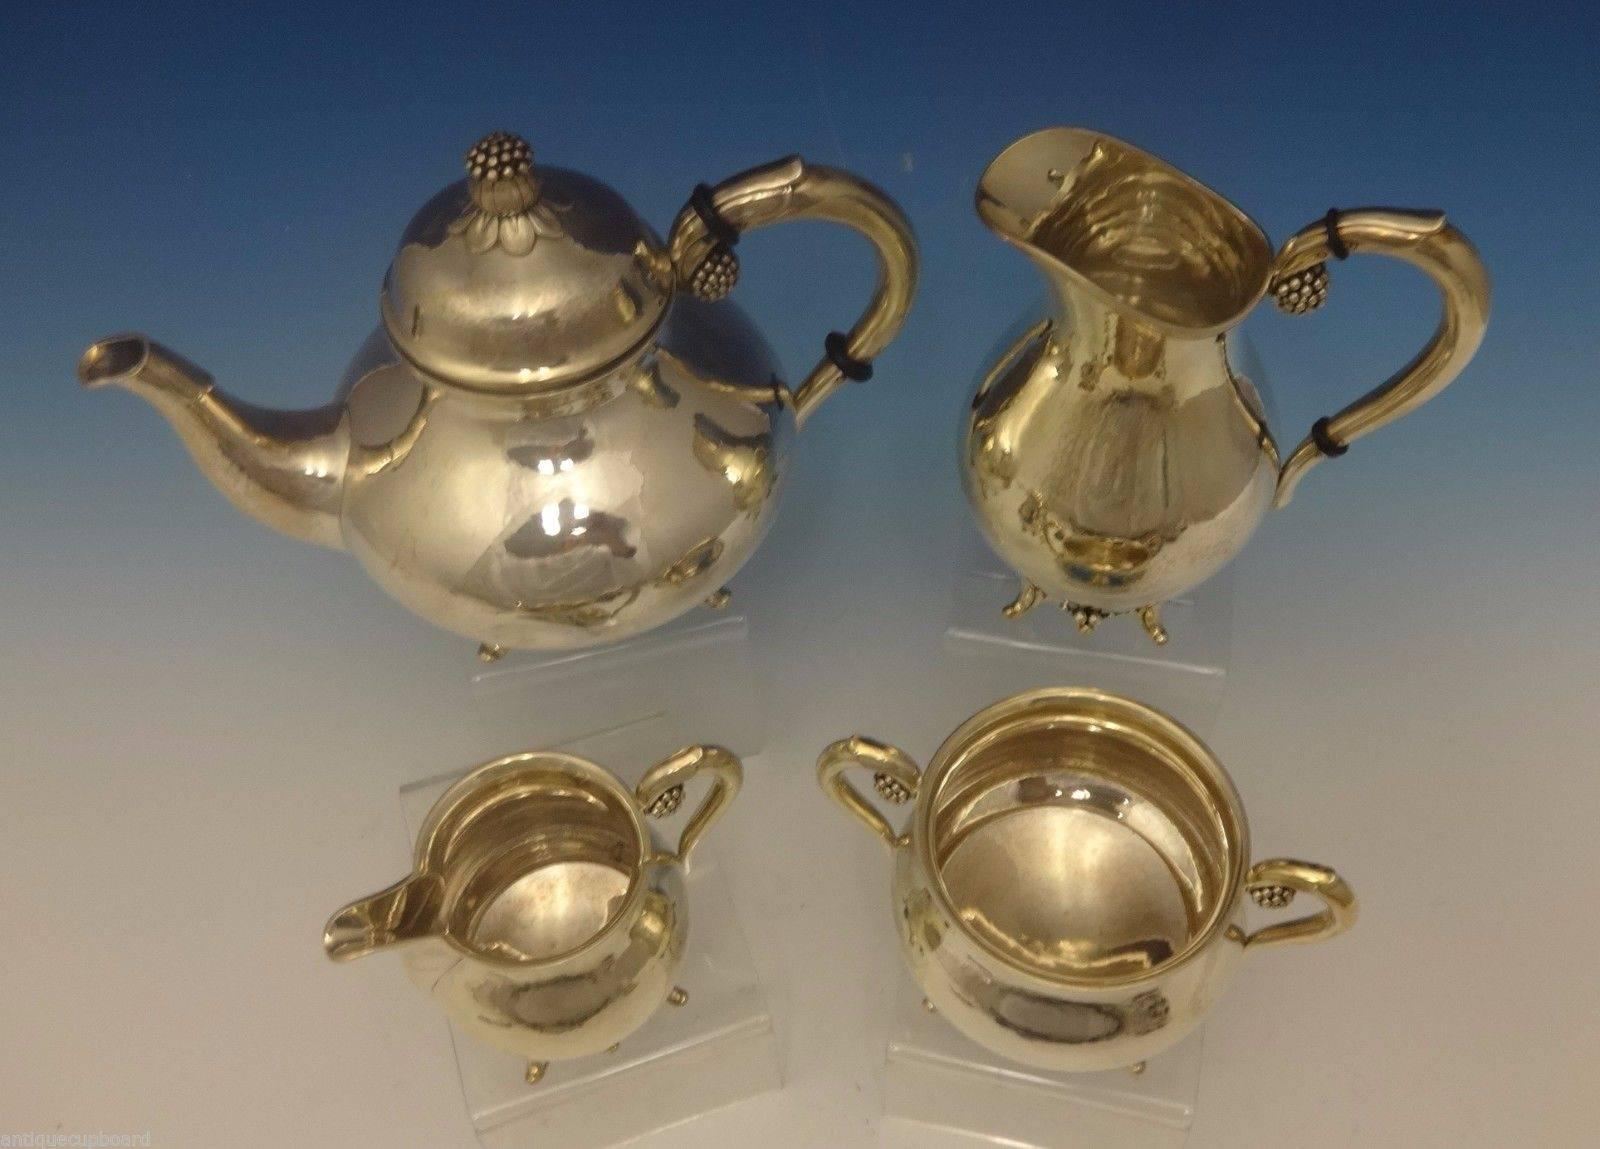 Grann & Laglye.

This lovely sterling silver four-piece tea set was made by Grann & Laglye of Denmark. The pieces have a three-D flower motif with beads on the finials, handles, and detail by the feet. Retailed by Dana Comp mark. The set dates from